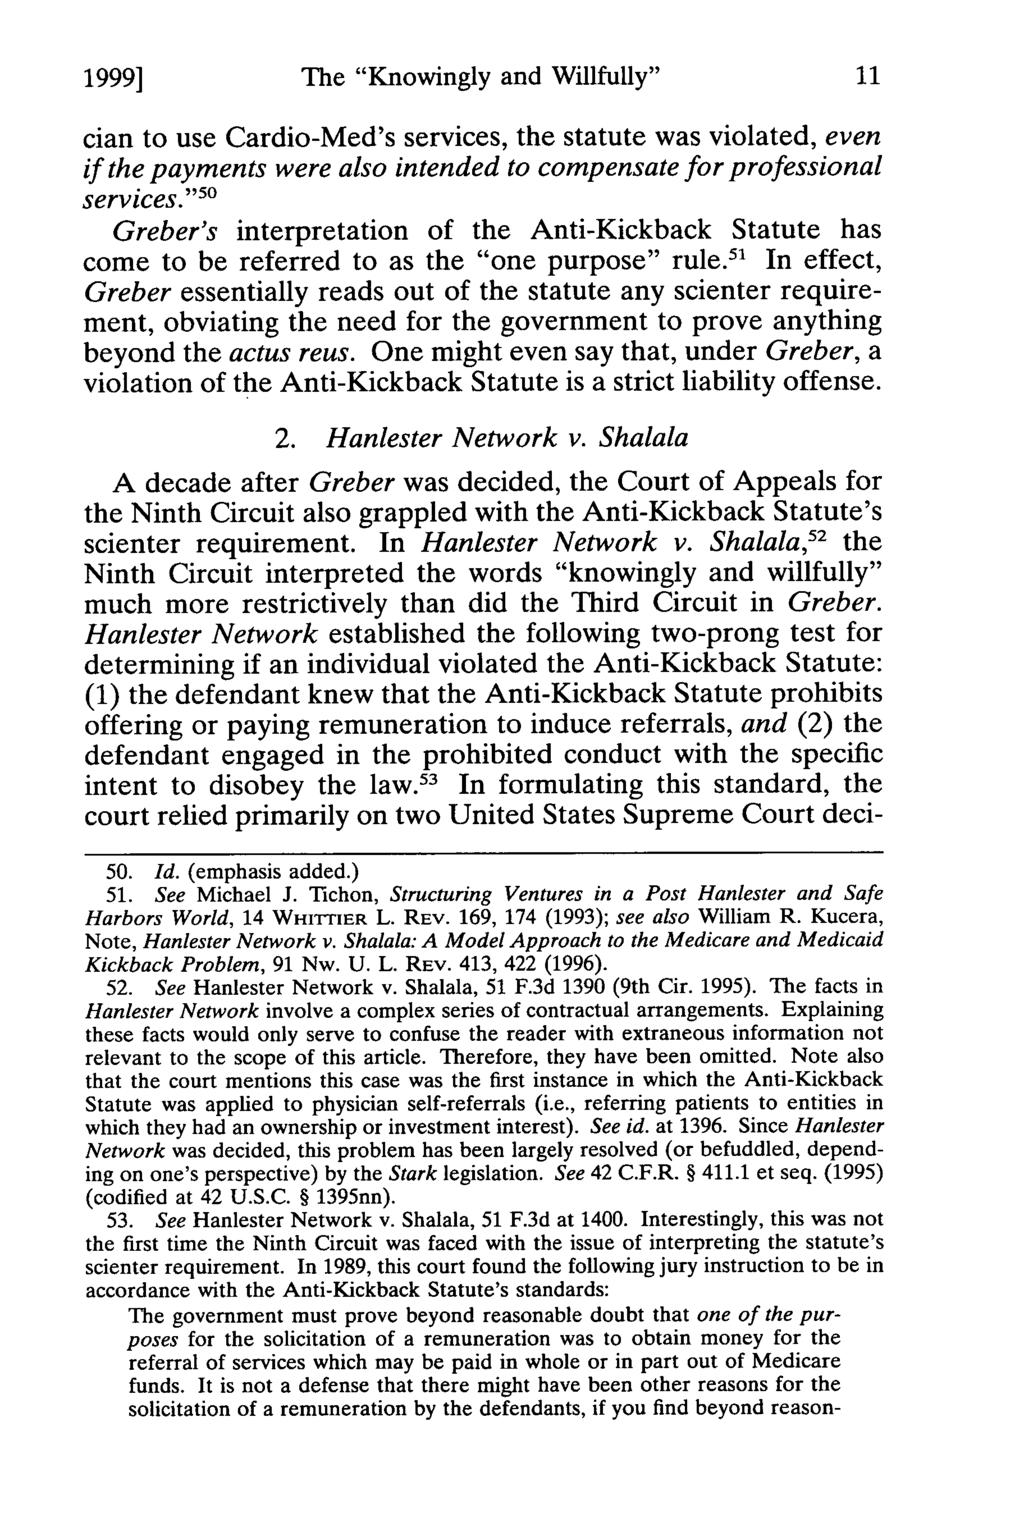 1999] Blair: The "Knowingly and Willfully" Continuum of the Anti-Kickback Stat The "Knowingly and Willfully" cian to use Cardio-Med's services, the statute was violated, even if the payments were